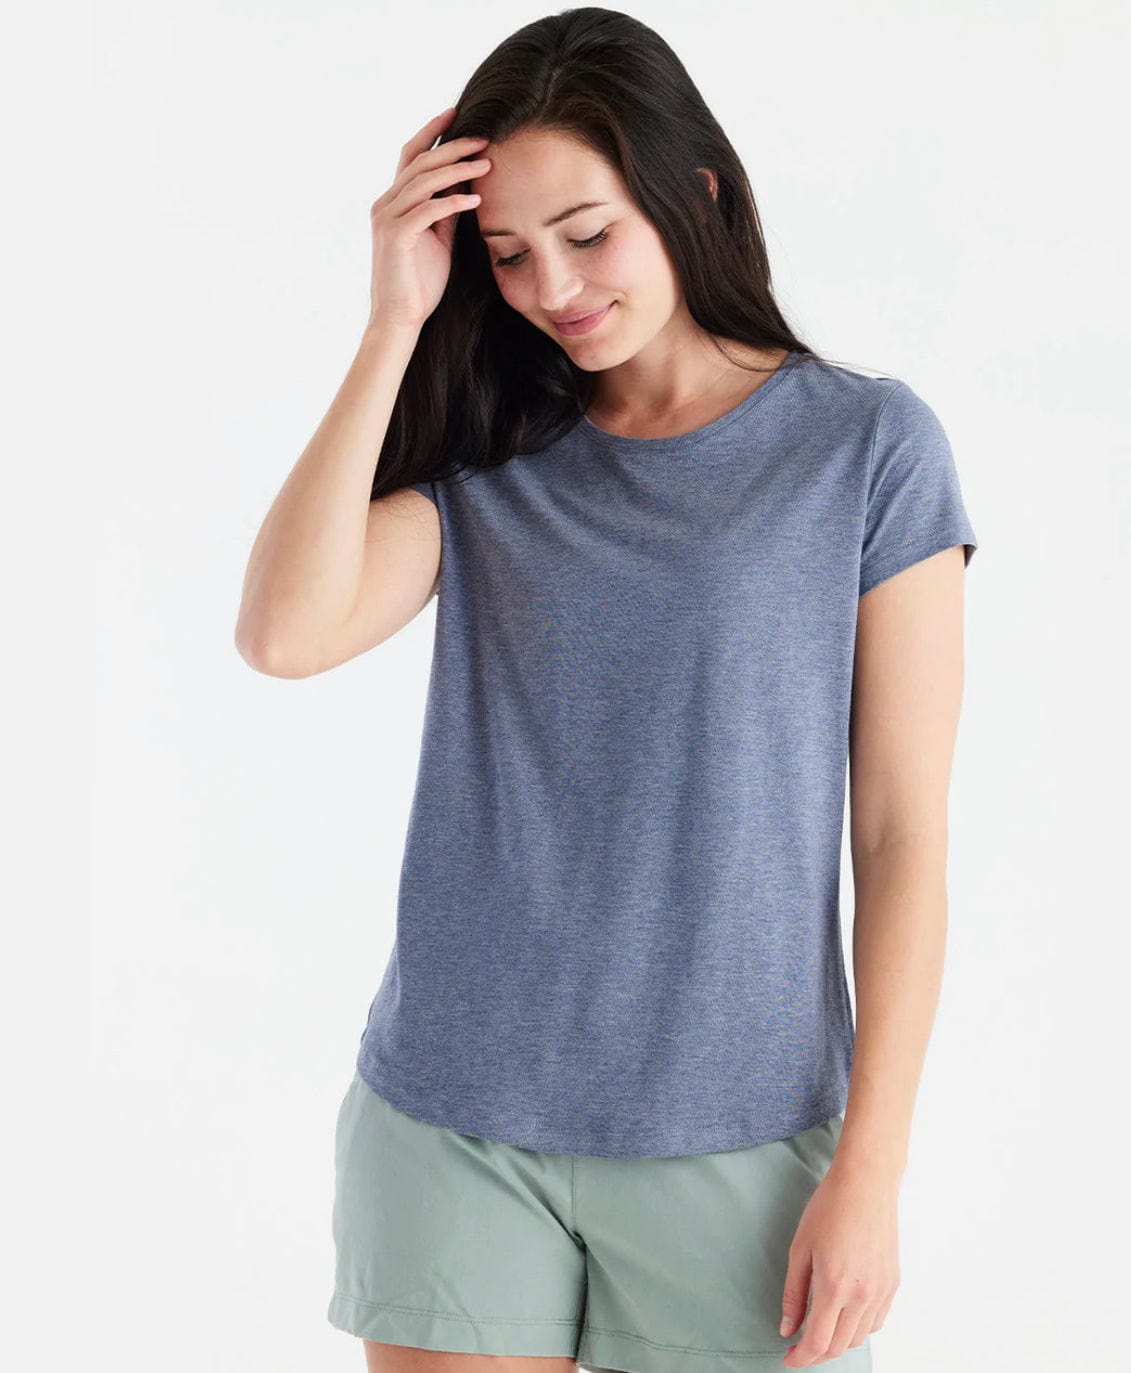 Free Fly Apparel T Shirts Women's Bamboo Current Tee